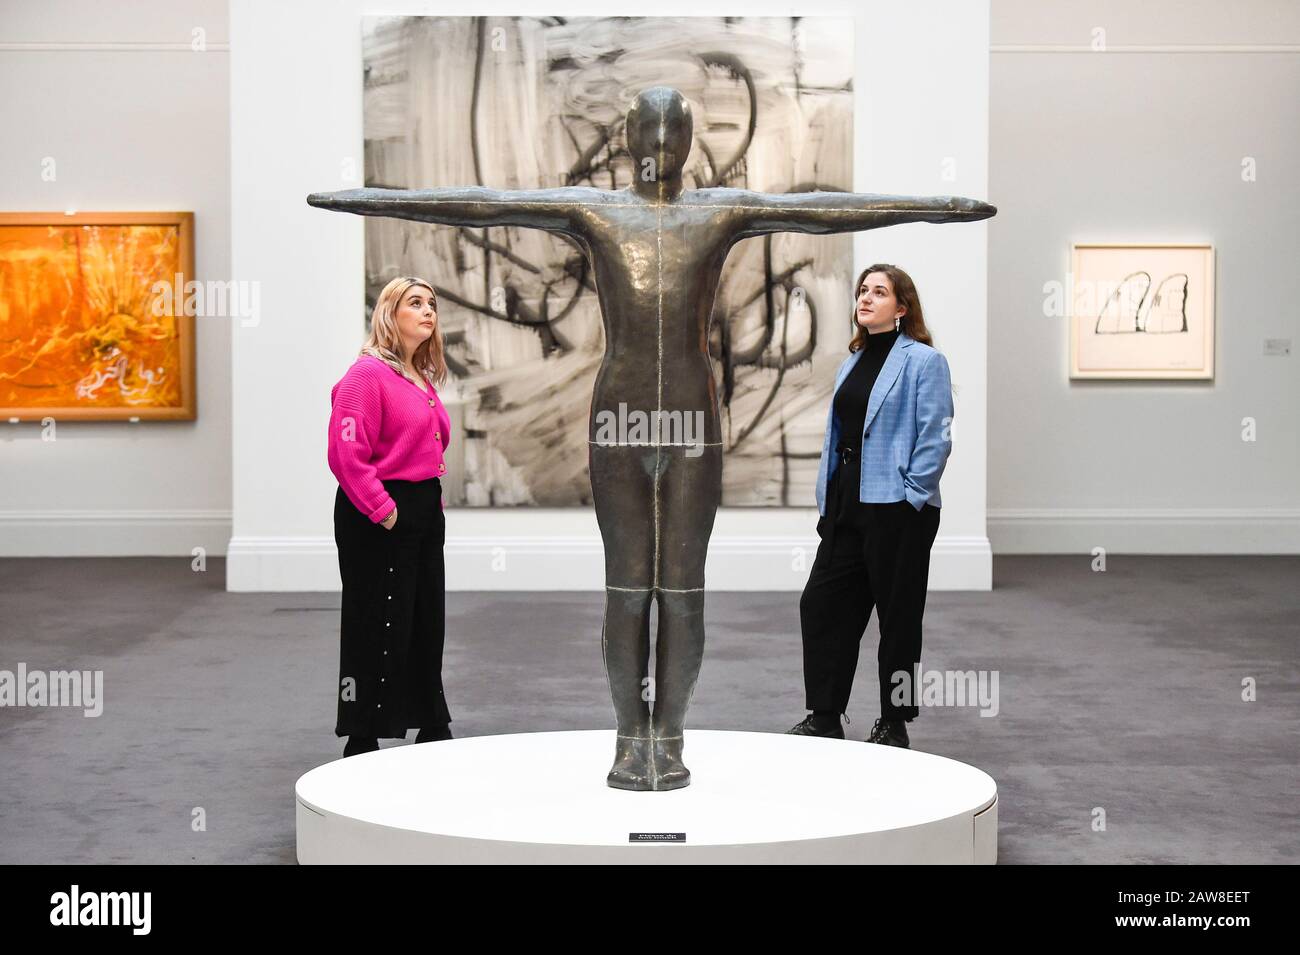 London, UK.  7 February 2020. Staff members view ''Standing Ground '' by Antony Gormley, (Est. £500,000 - 700,000). Preview of Sotheby's Contemporary Art Sale in their New Bond Street galleries.  Works by artists including Francis Bacon, Yves Klein, Jean-Michel Basquiat and David Hockney will be offered for auction on 11 February 2020. Credit: Stephen Chung / Alamy Live News Stock Photo